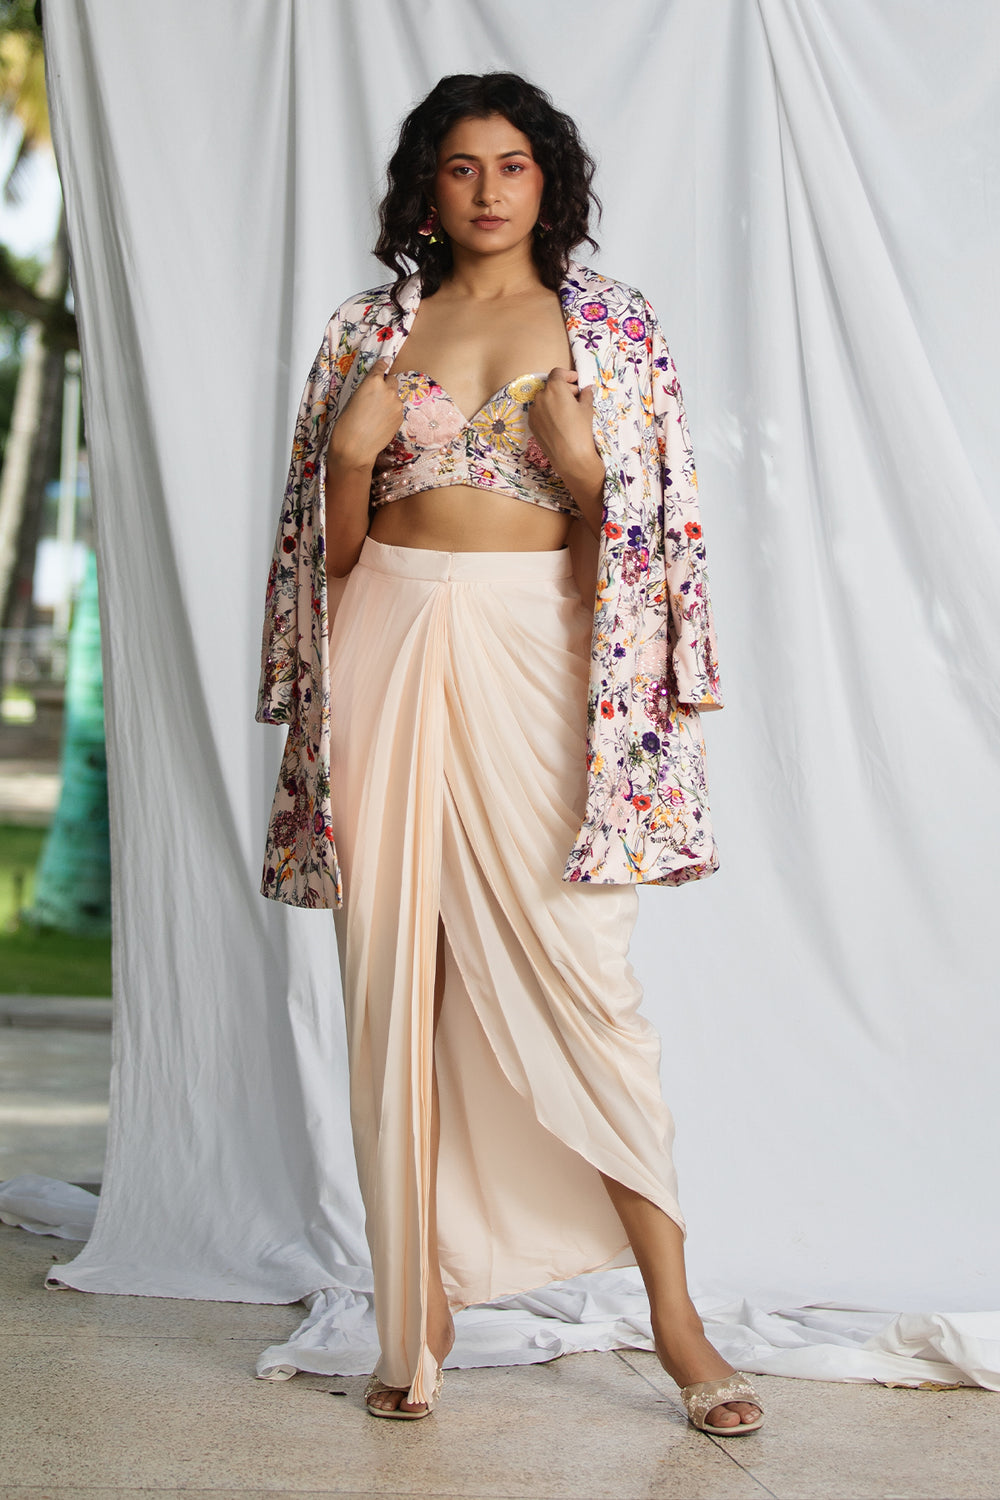 Suede blazer styled with embroidered bustier and draped skirt